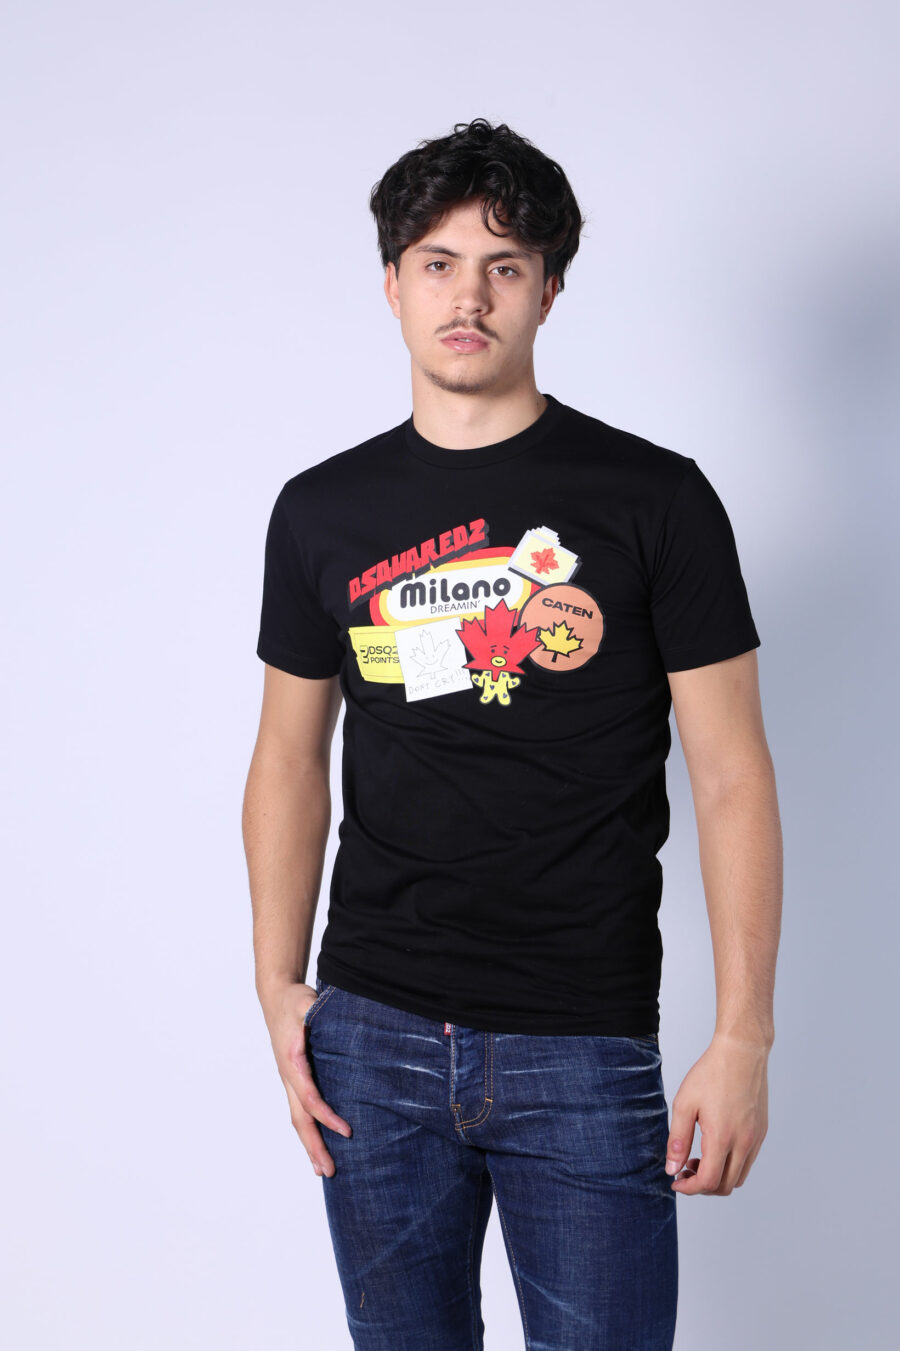 Black T-shirt with "sitckers" maxi logo - Untitled Catalog 05493